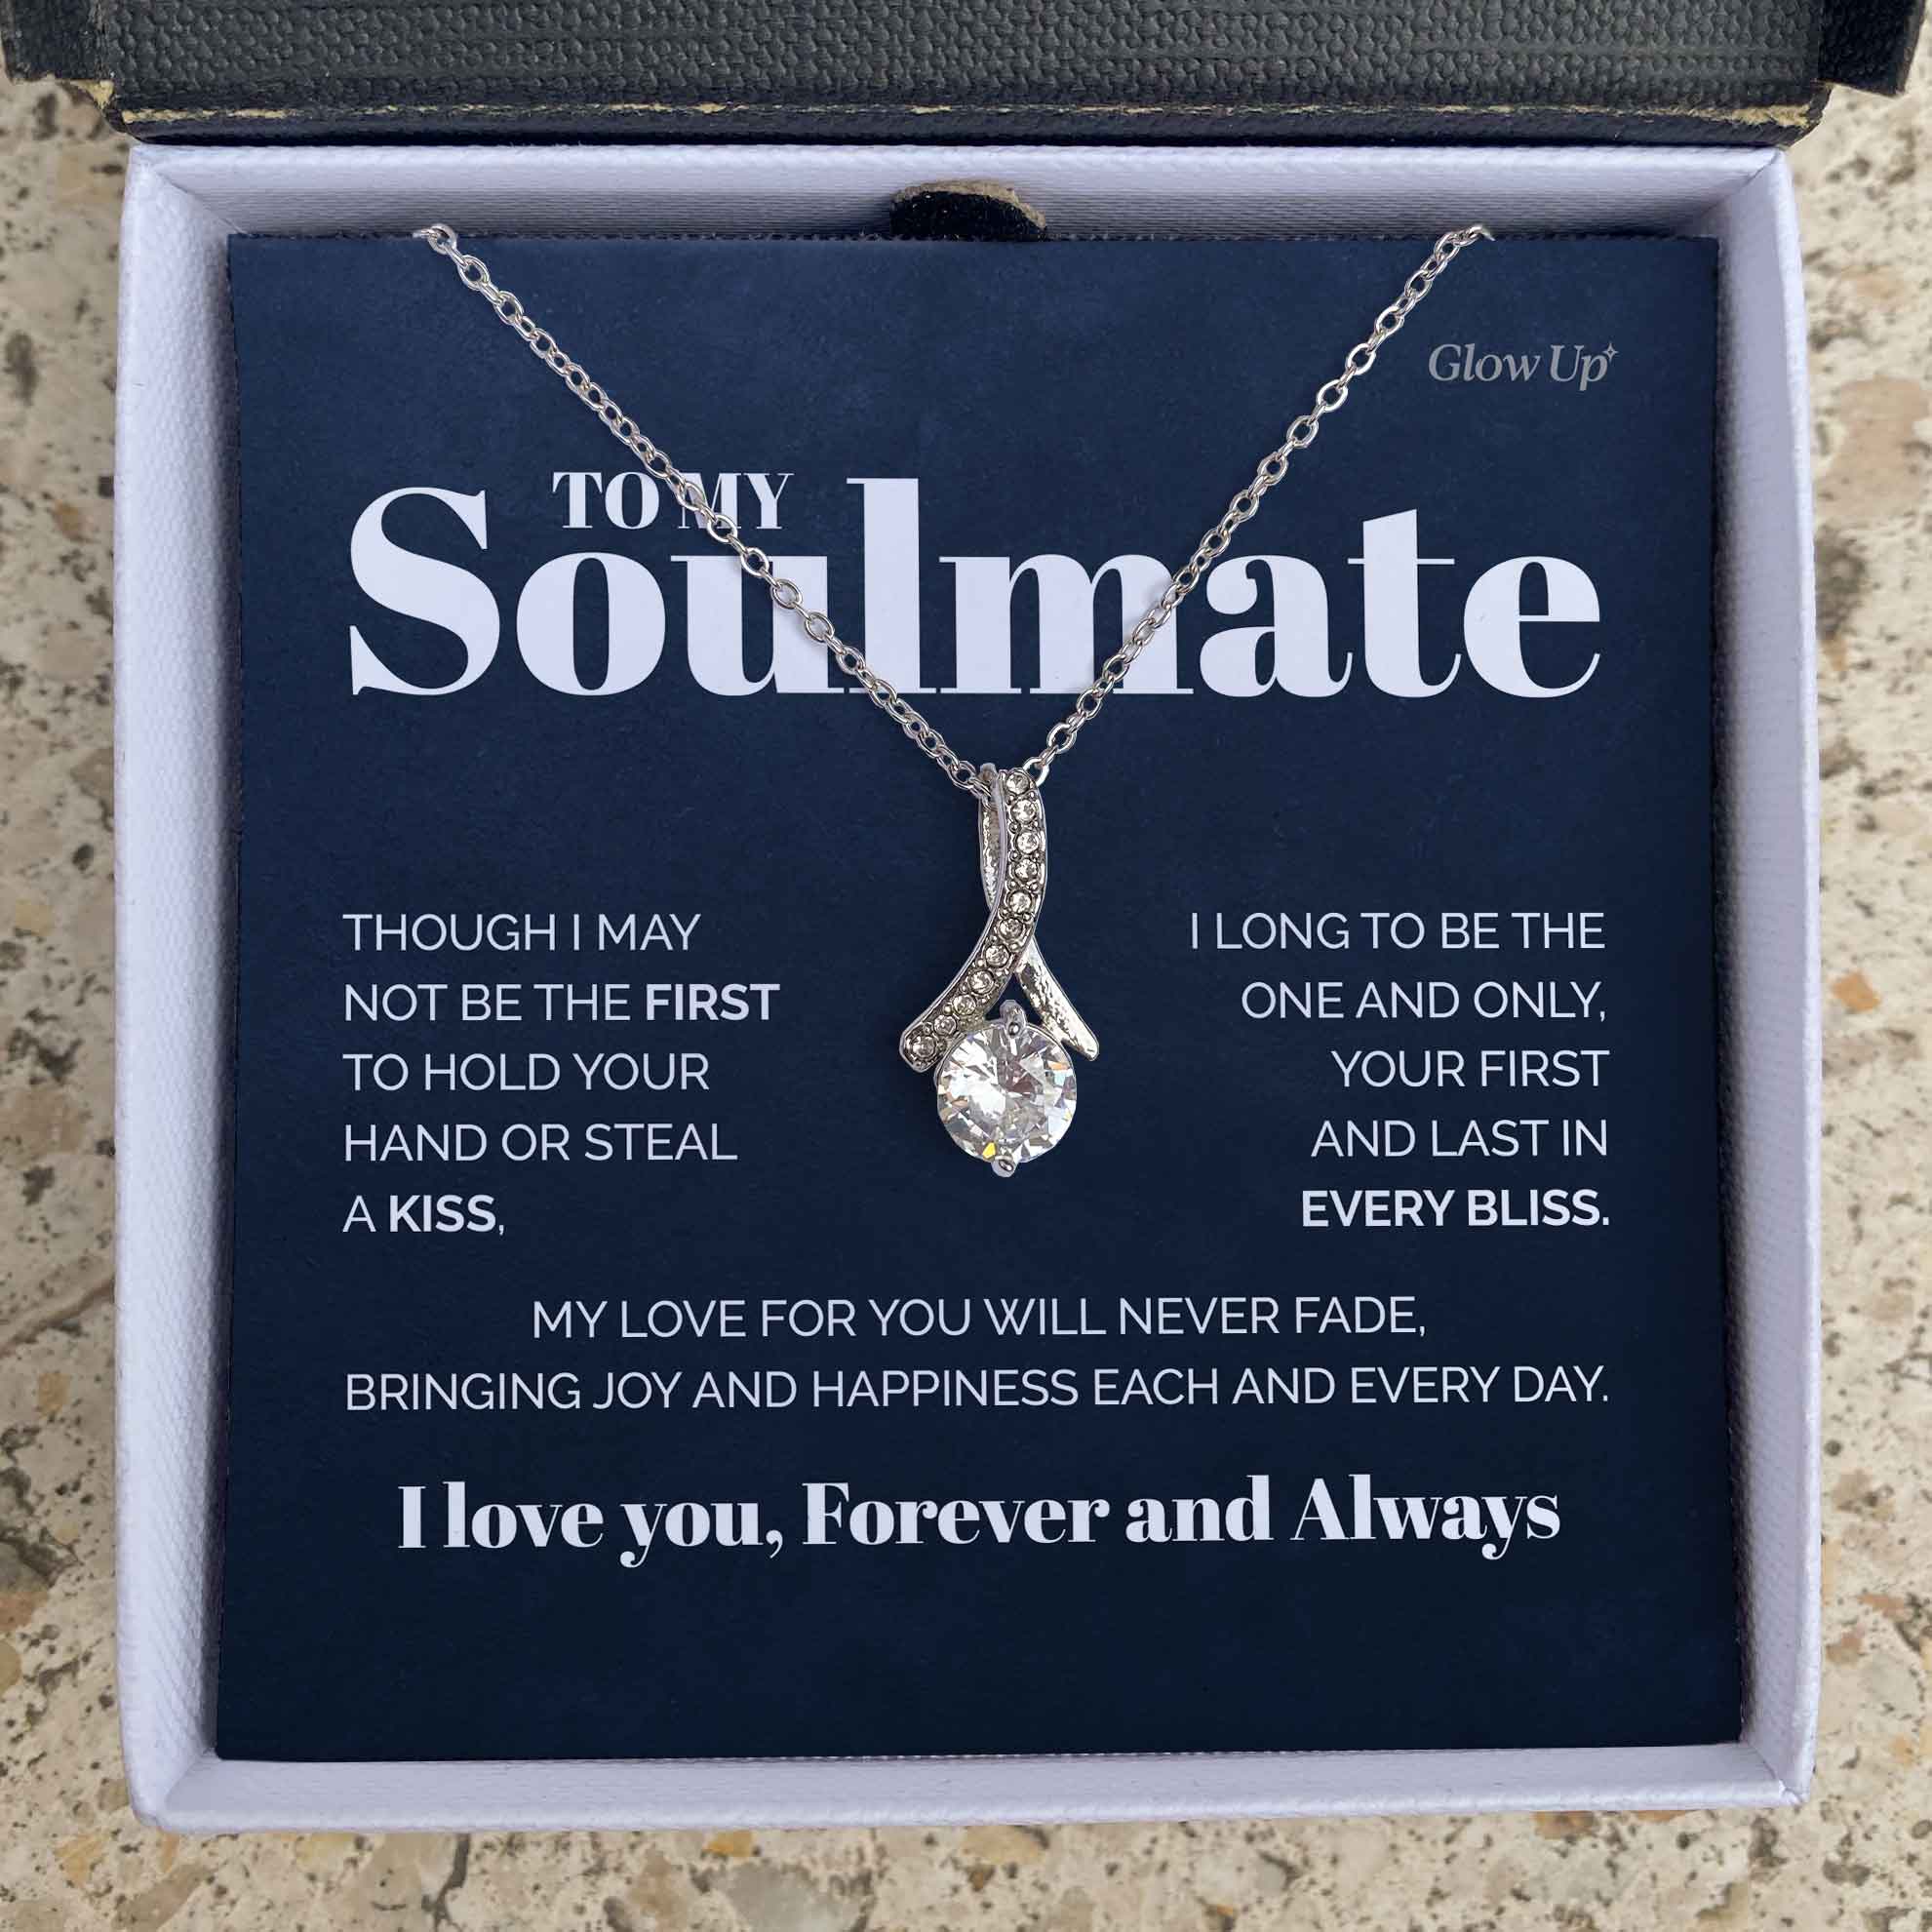 ShineOn Fulfillment Jewelry 14K White Gold Finish / Two-Toned Box To My Soulmate - My love will never fade - Ribbon necklace